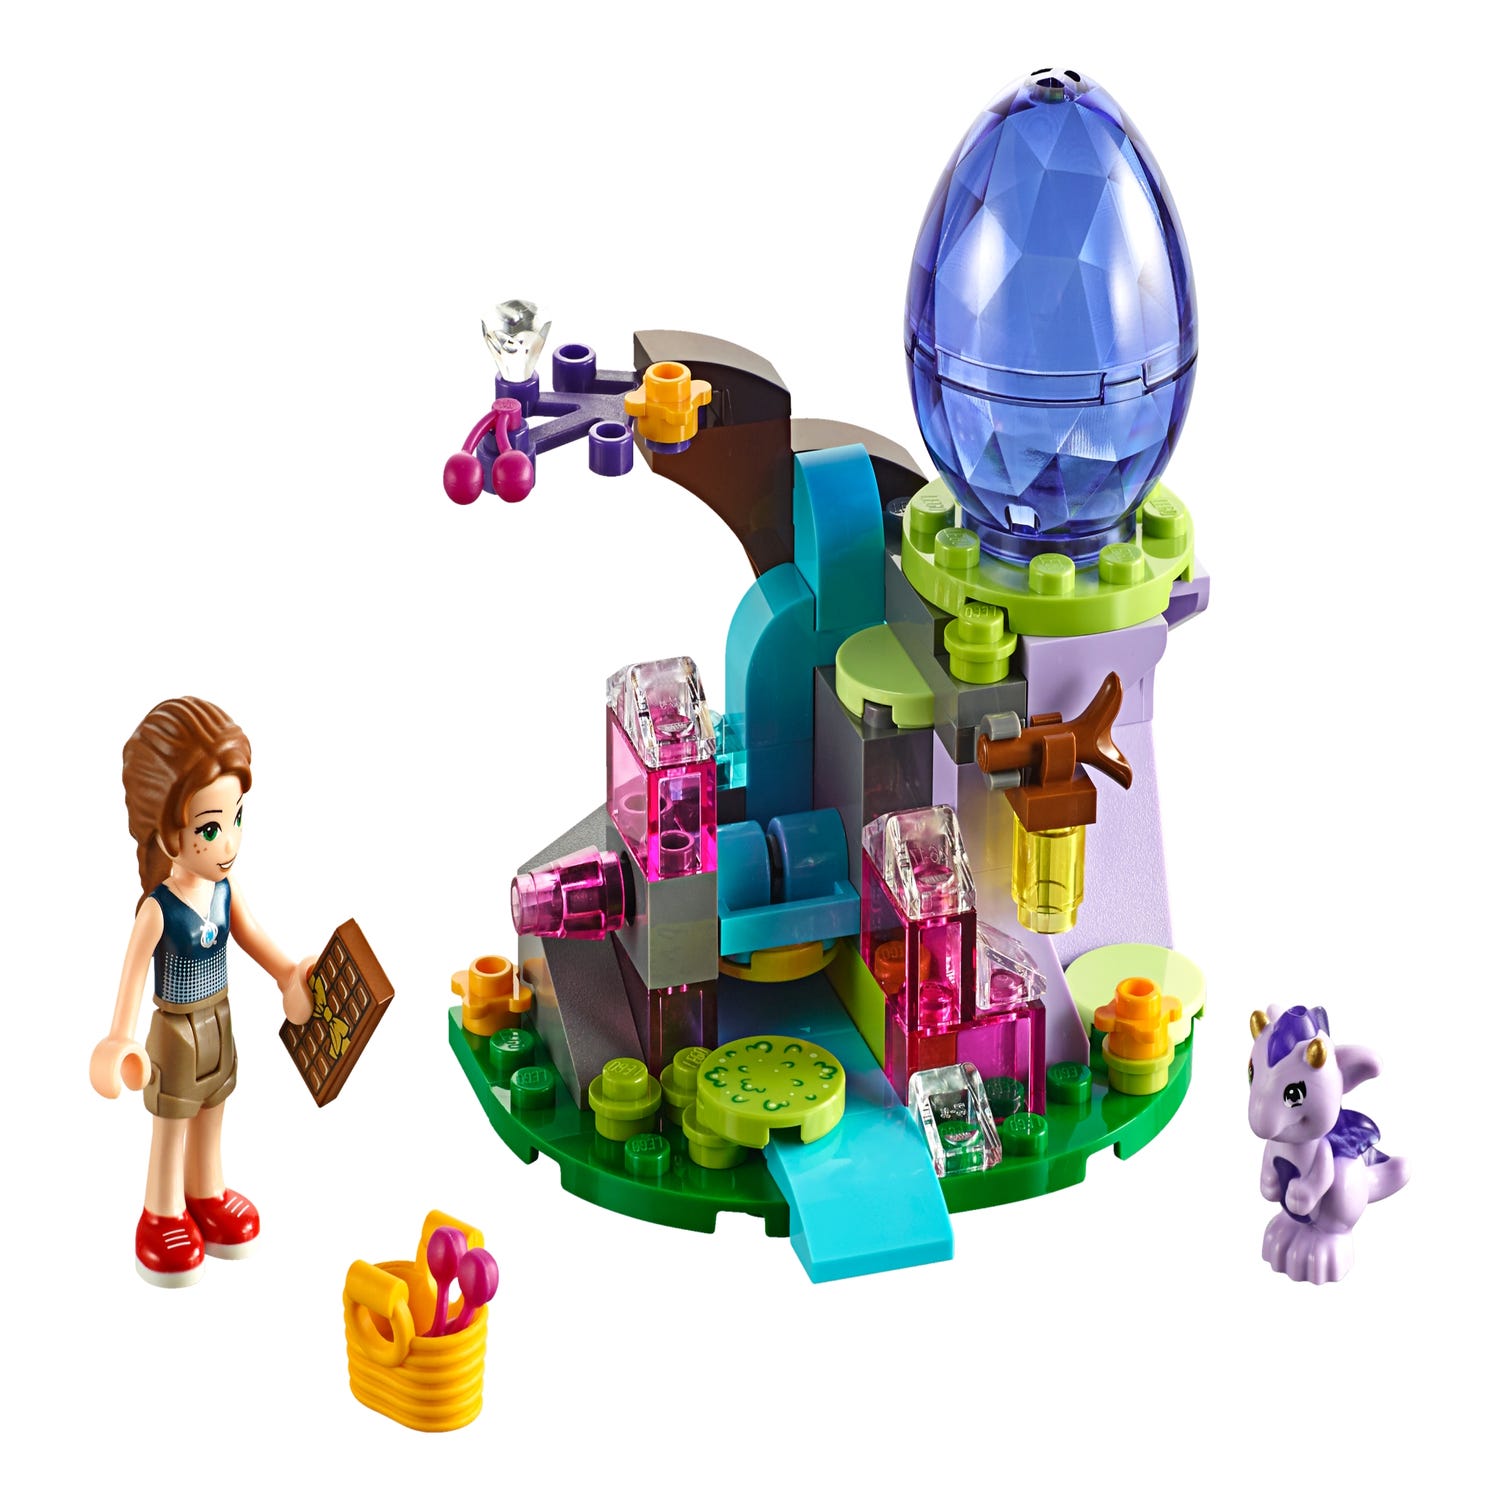 Emily Jones & the Baby Wind Dragon 41171 | Elves Buy online at the Official LEGO® Shop